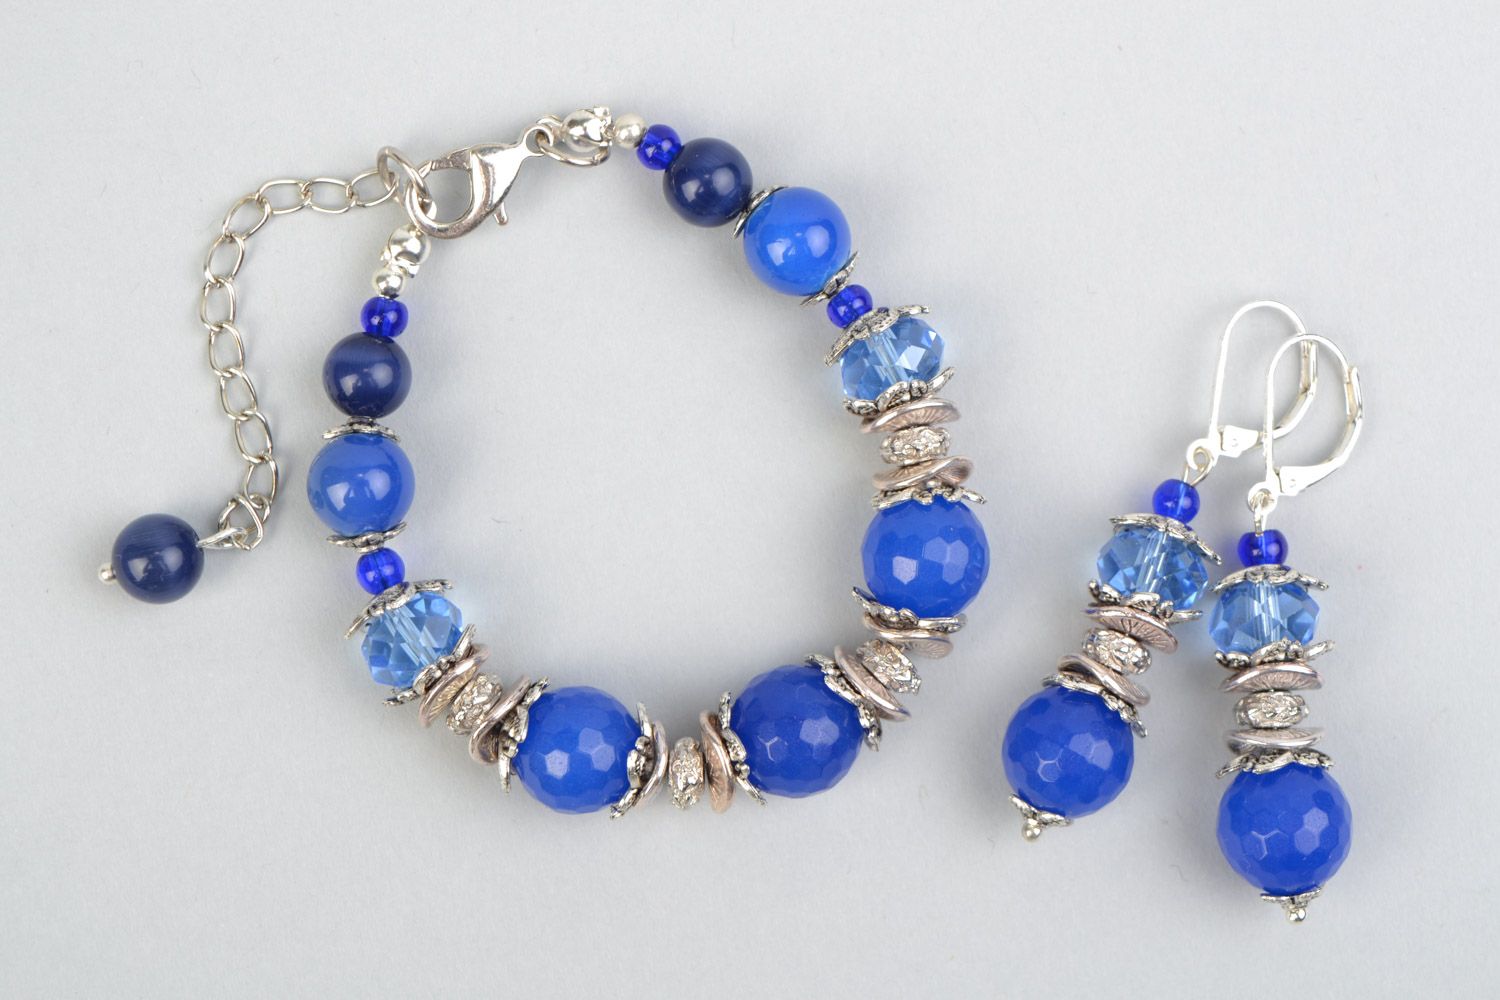 Handmade jewelry set with agate and glass beads in blue color earrings and bracelet photo 1